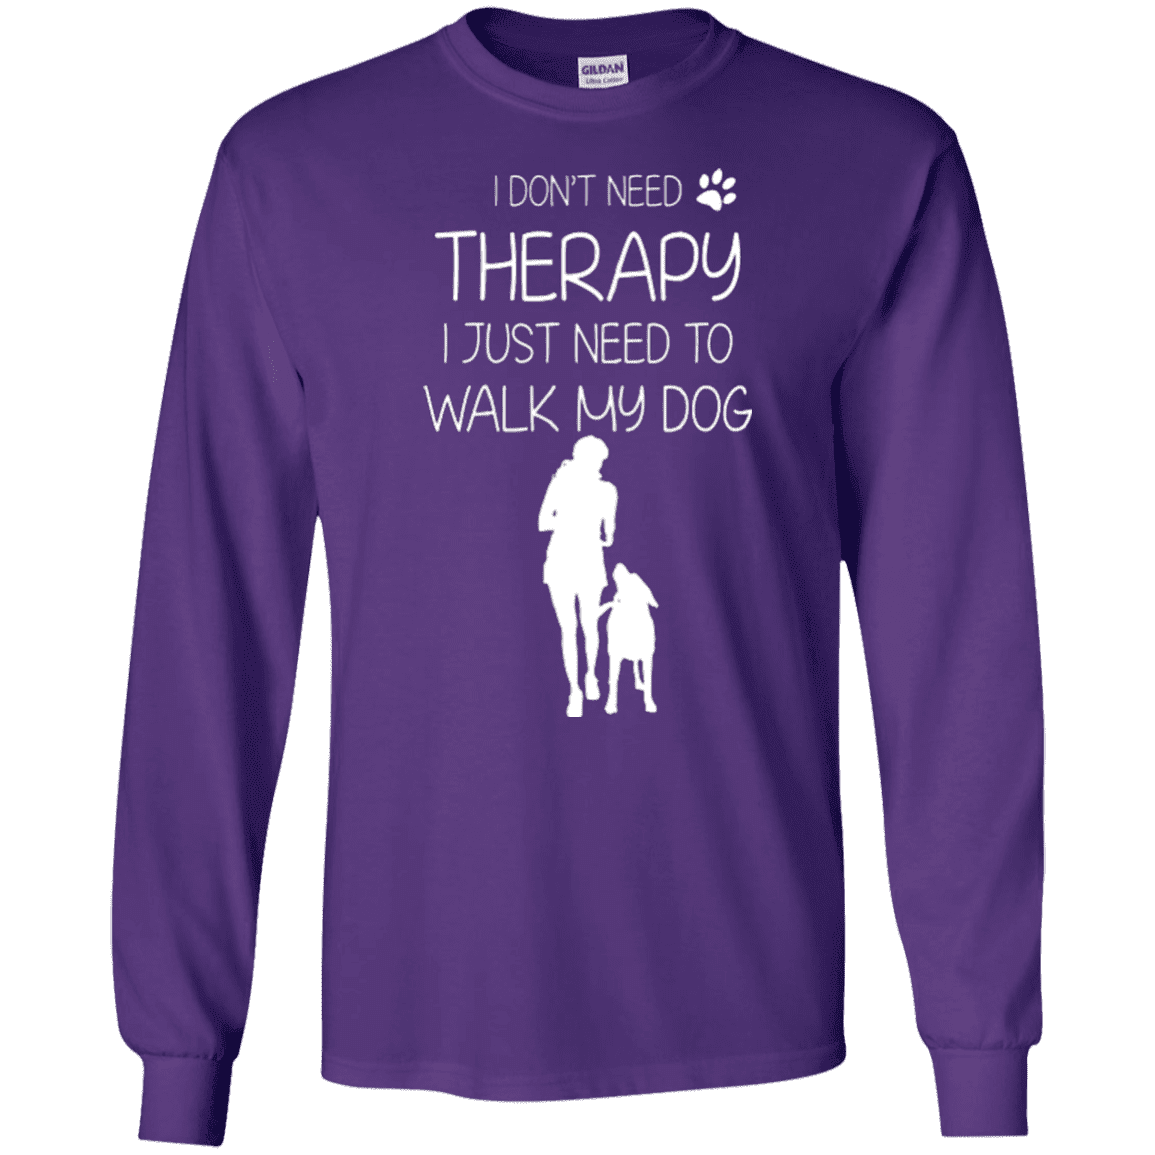 I Don't Need Therapy - Long Sleeve T Shirt.